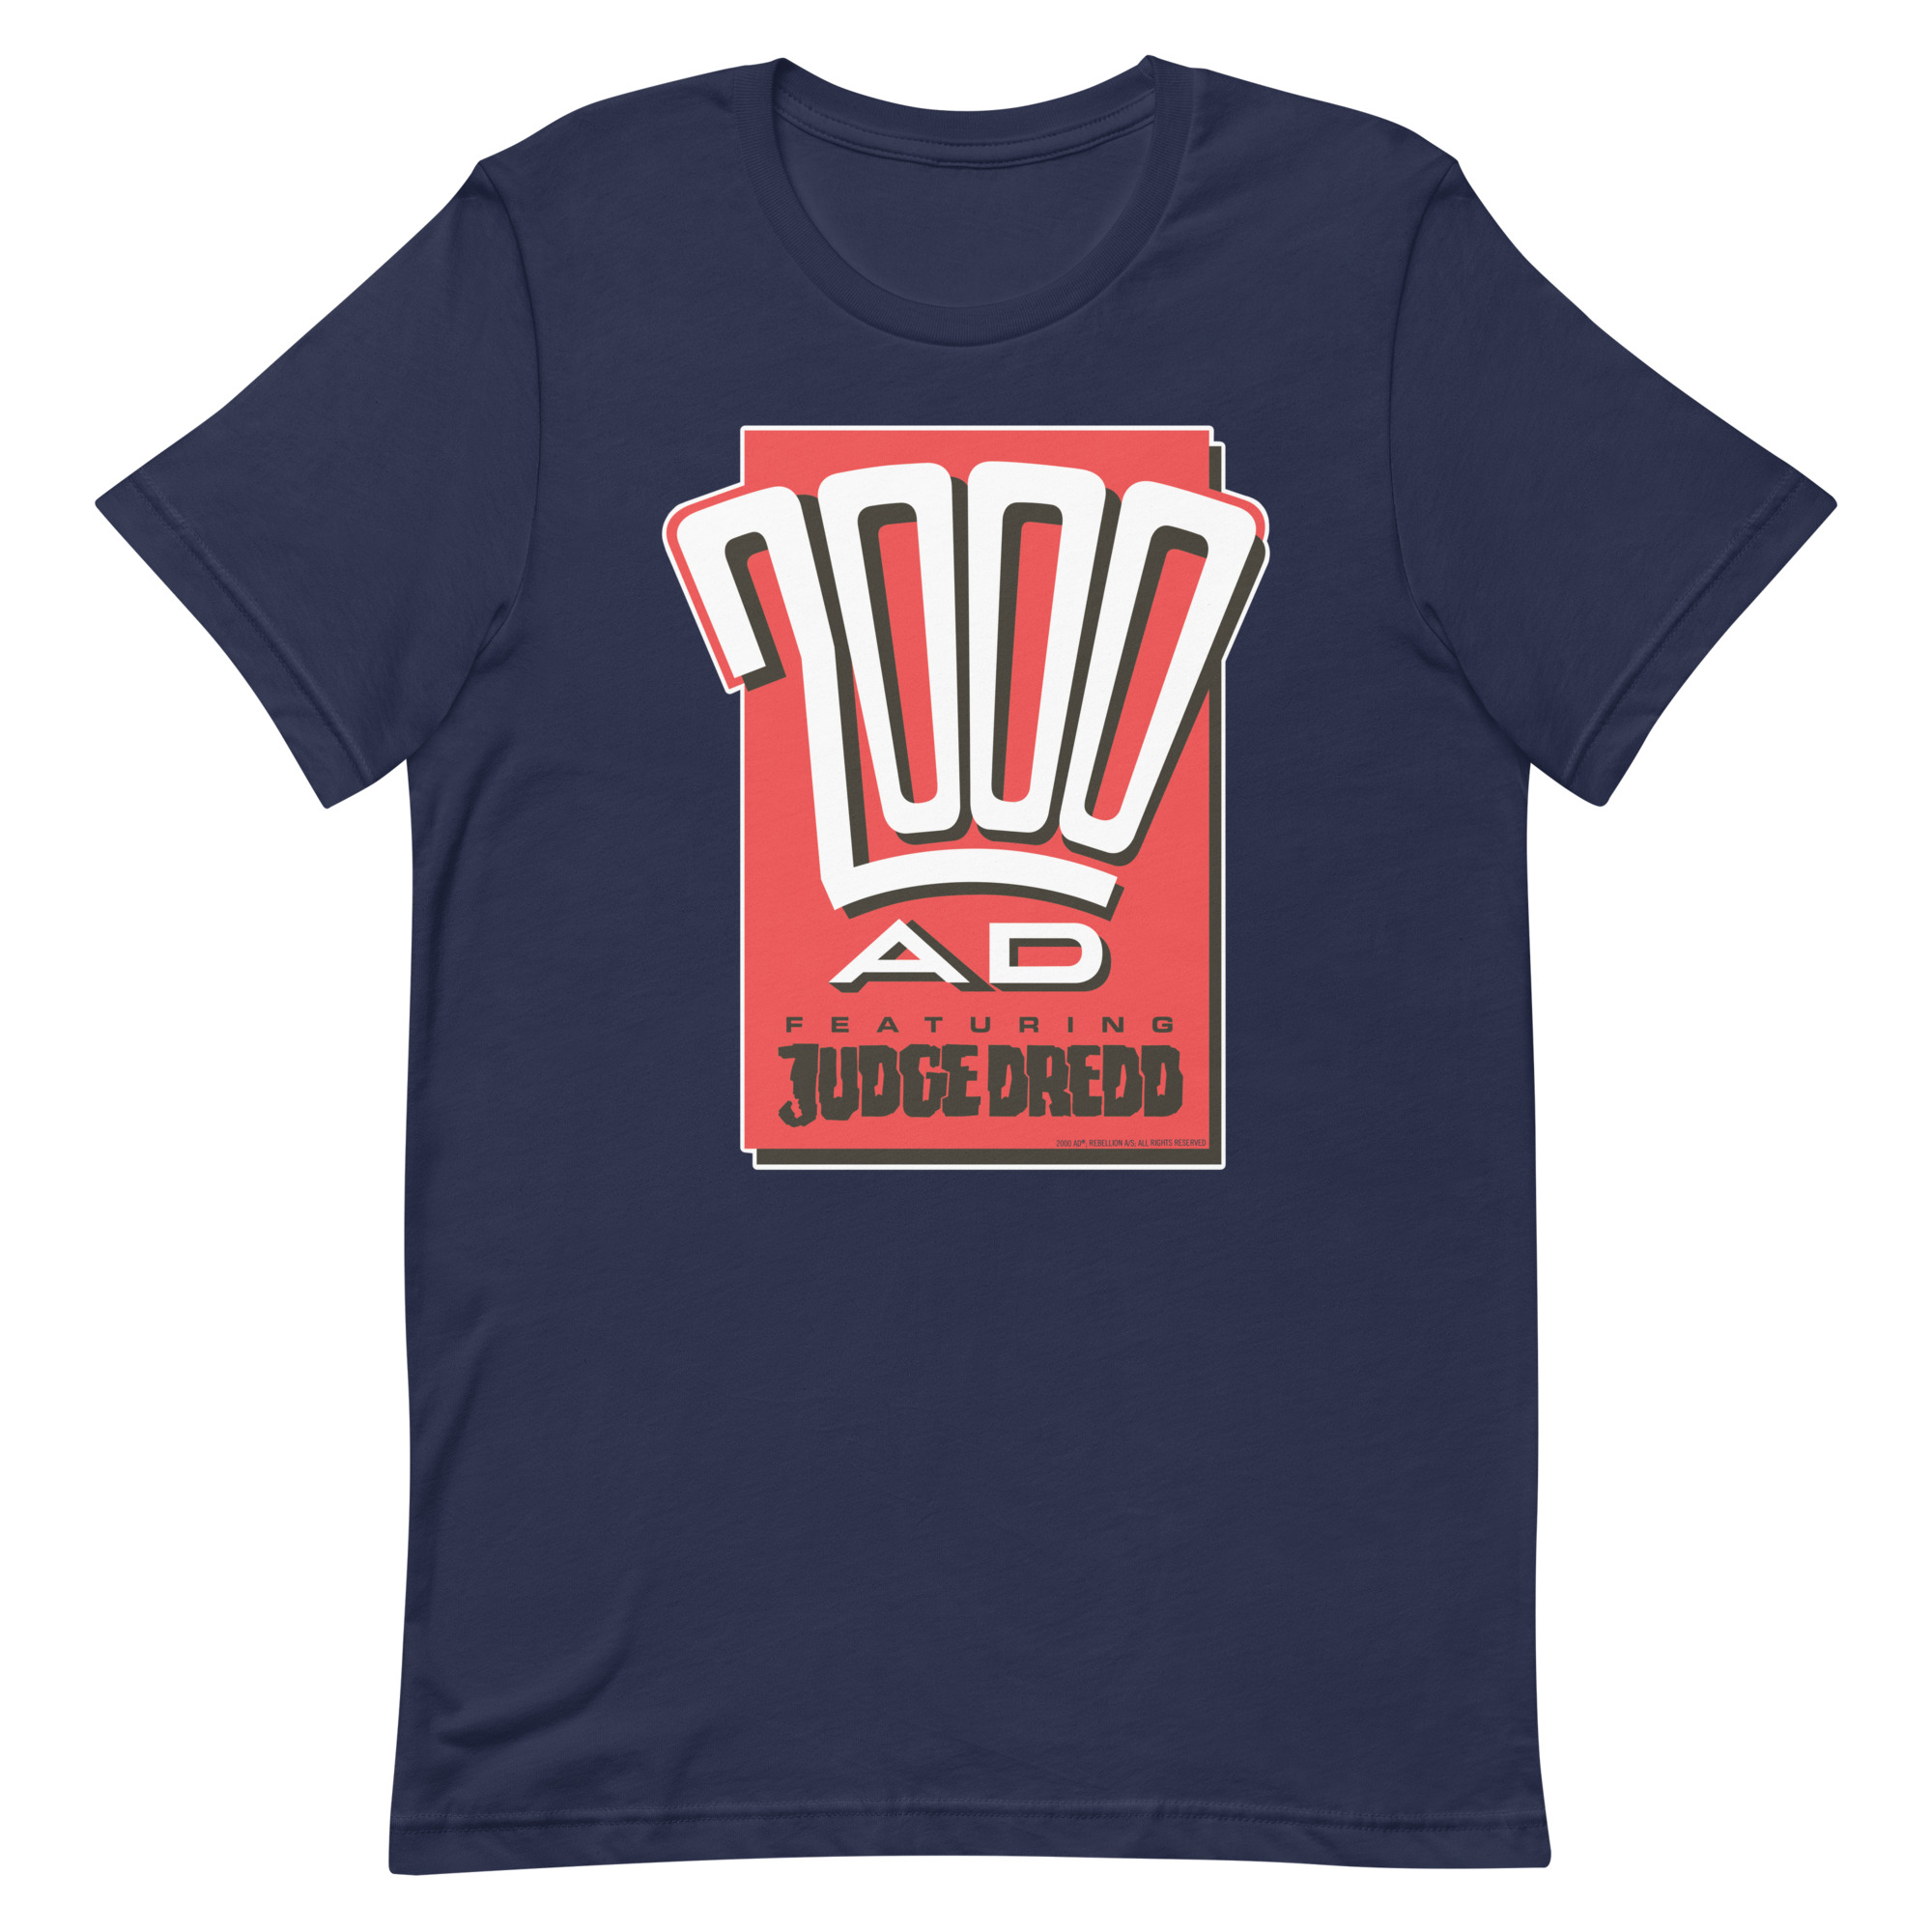 Image of a Navy coloured 2000AD - Classic 1990s Fan t-shirt featuring a large 2000AD - Classic 1990s Fan logo in the middle